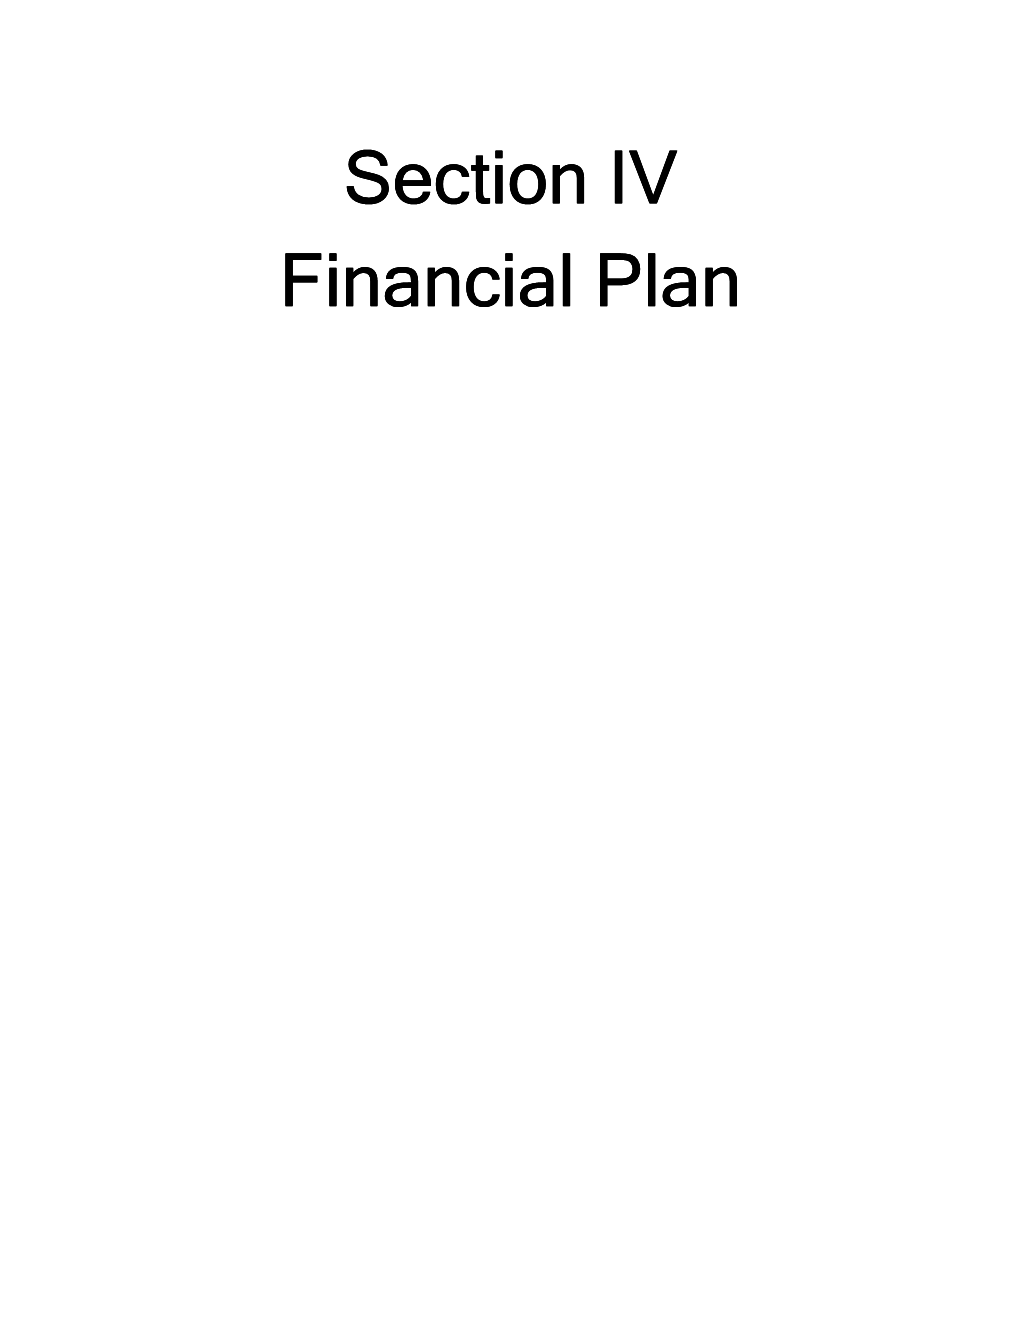 Section IV: Financial Plan